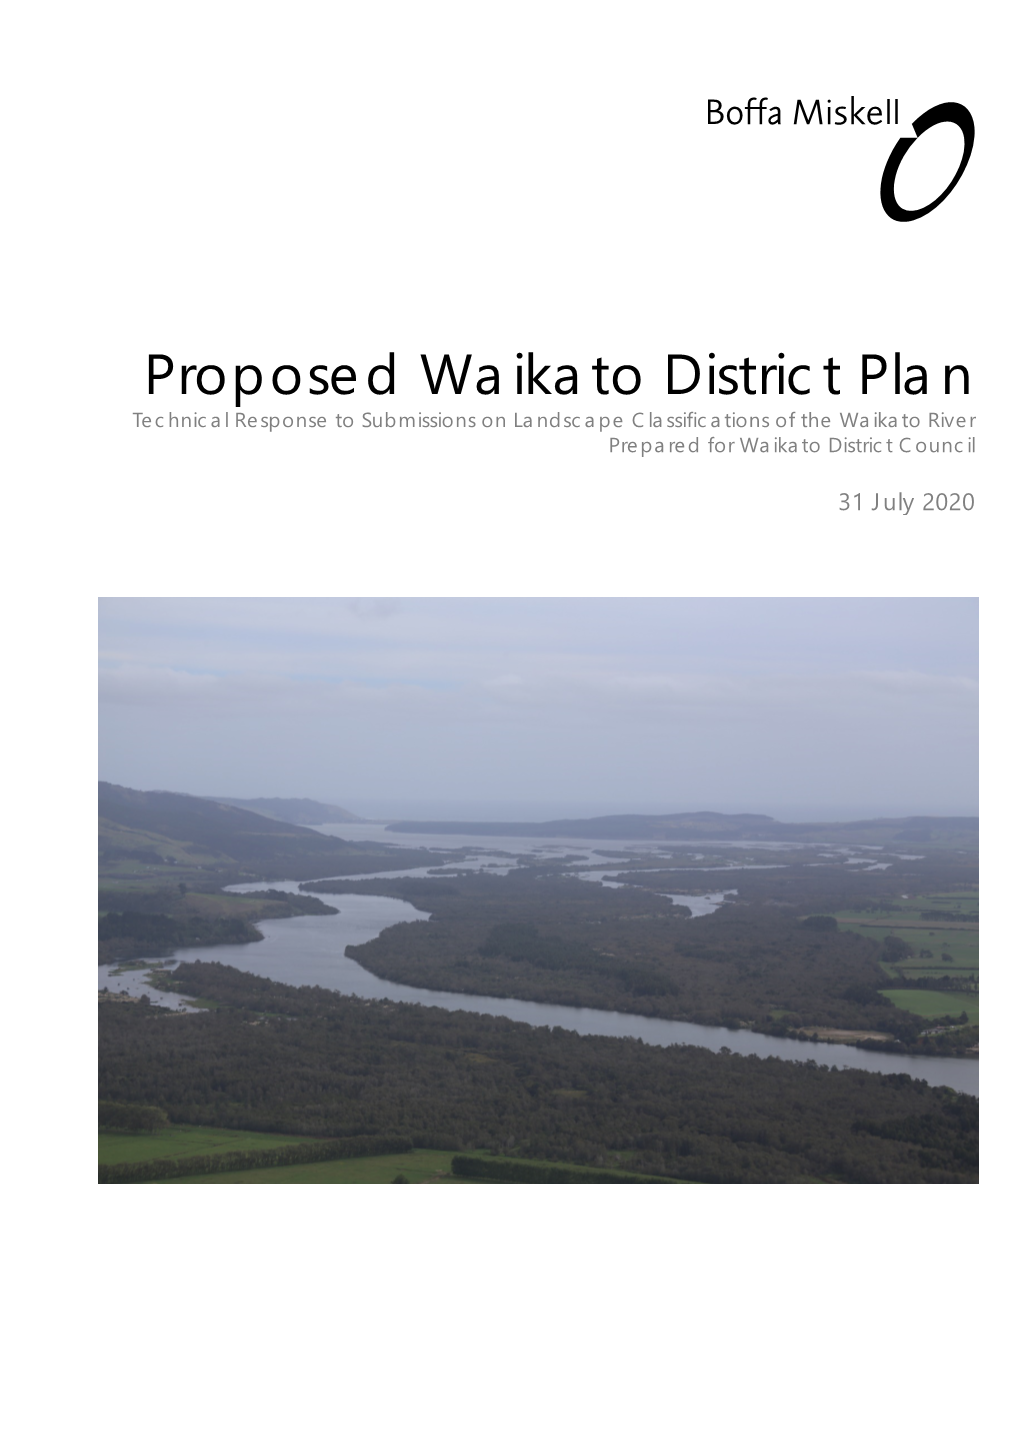 Proposed Waikato District Plan Technical Response to Submissions on Landscape Classifications of the Waikato River Prepared for Waikato District Council